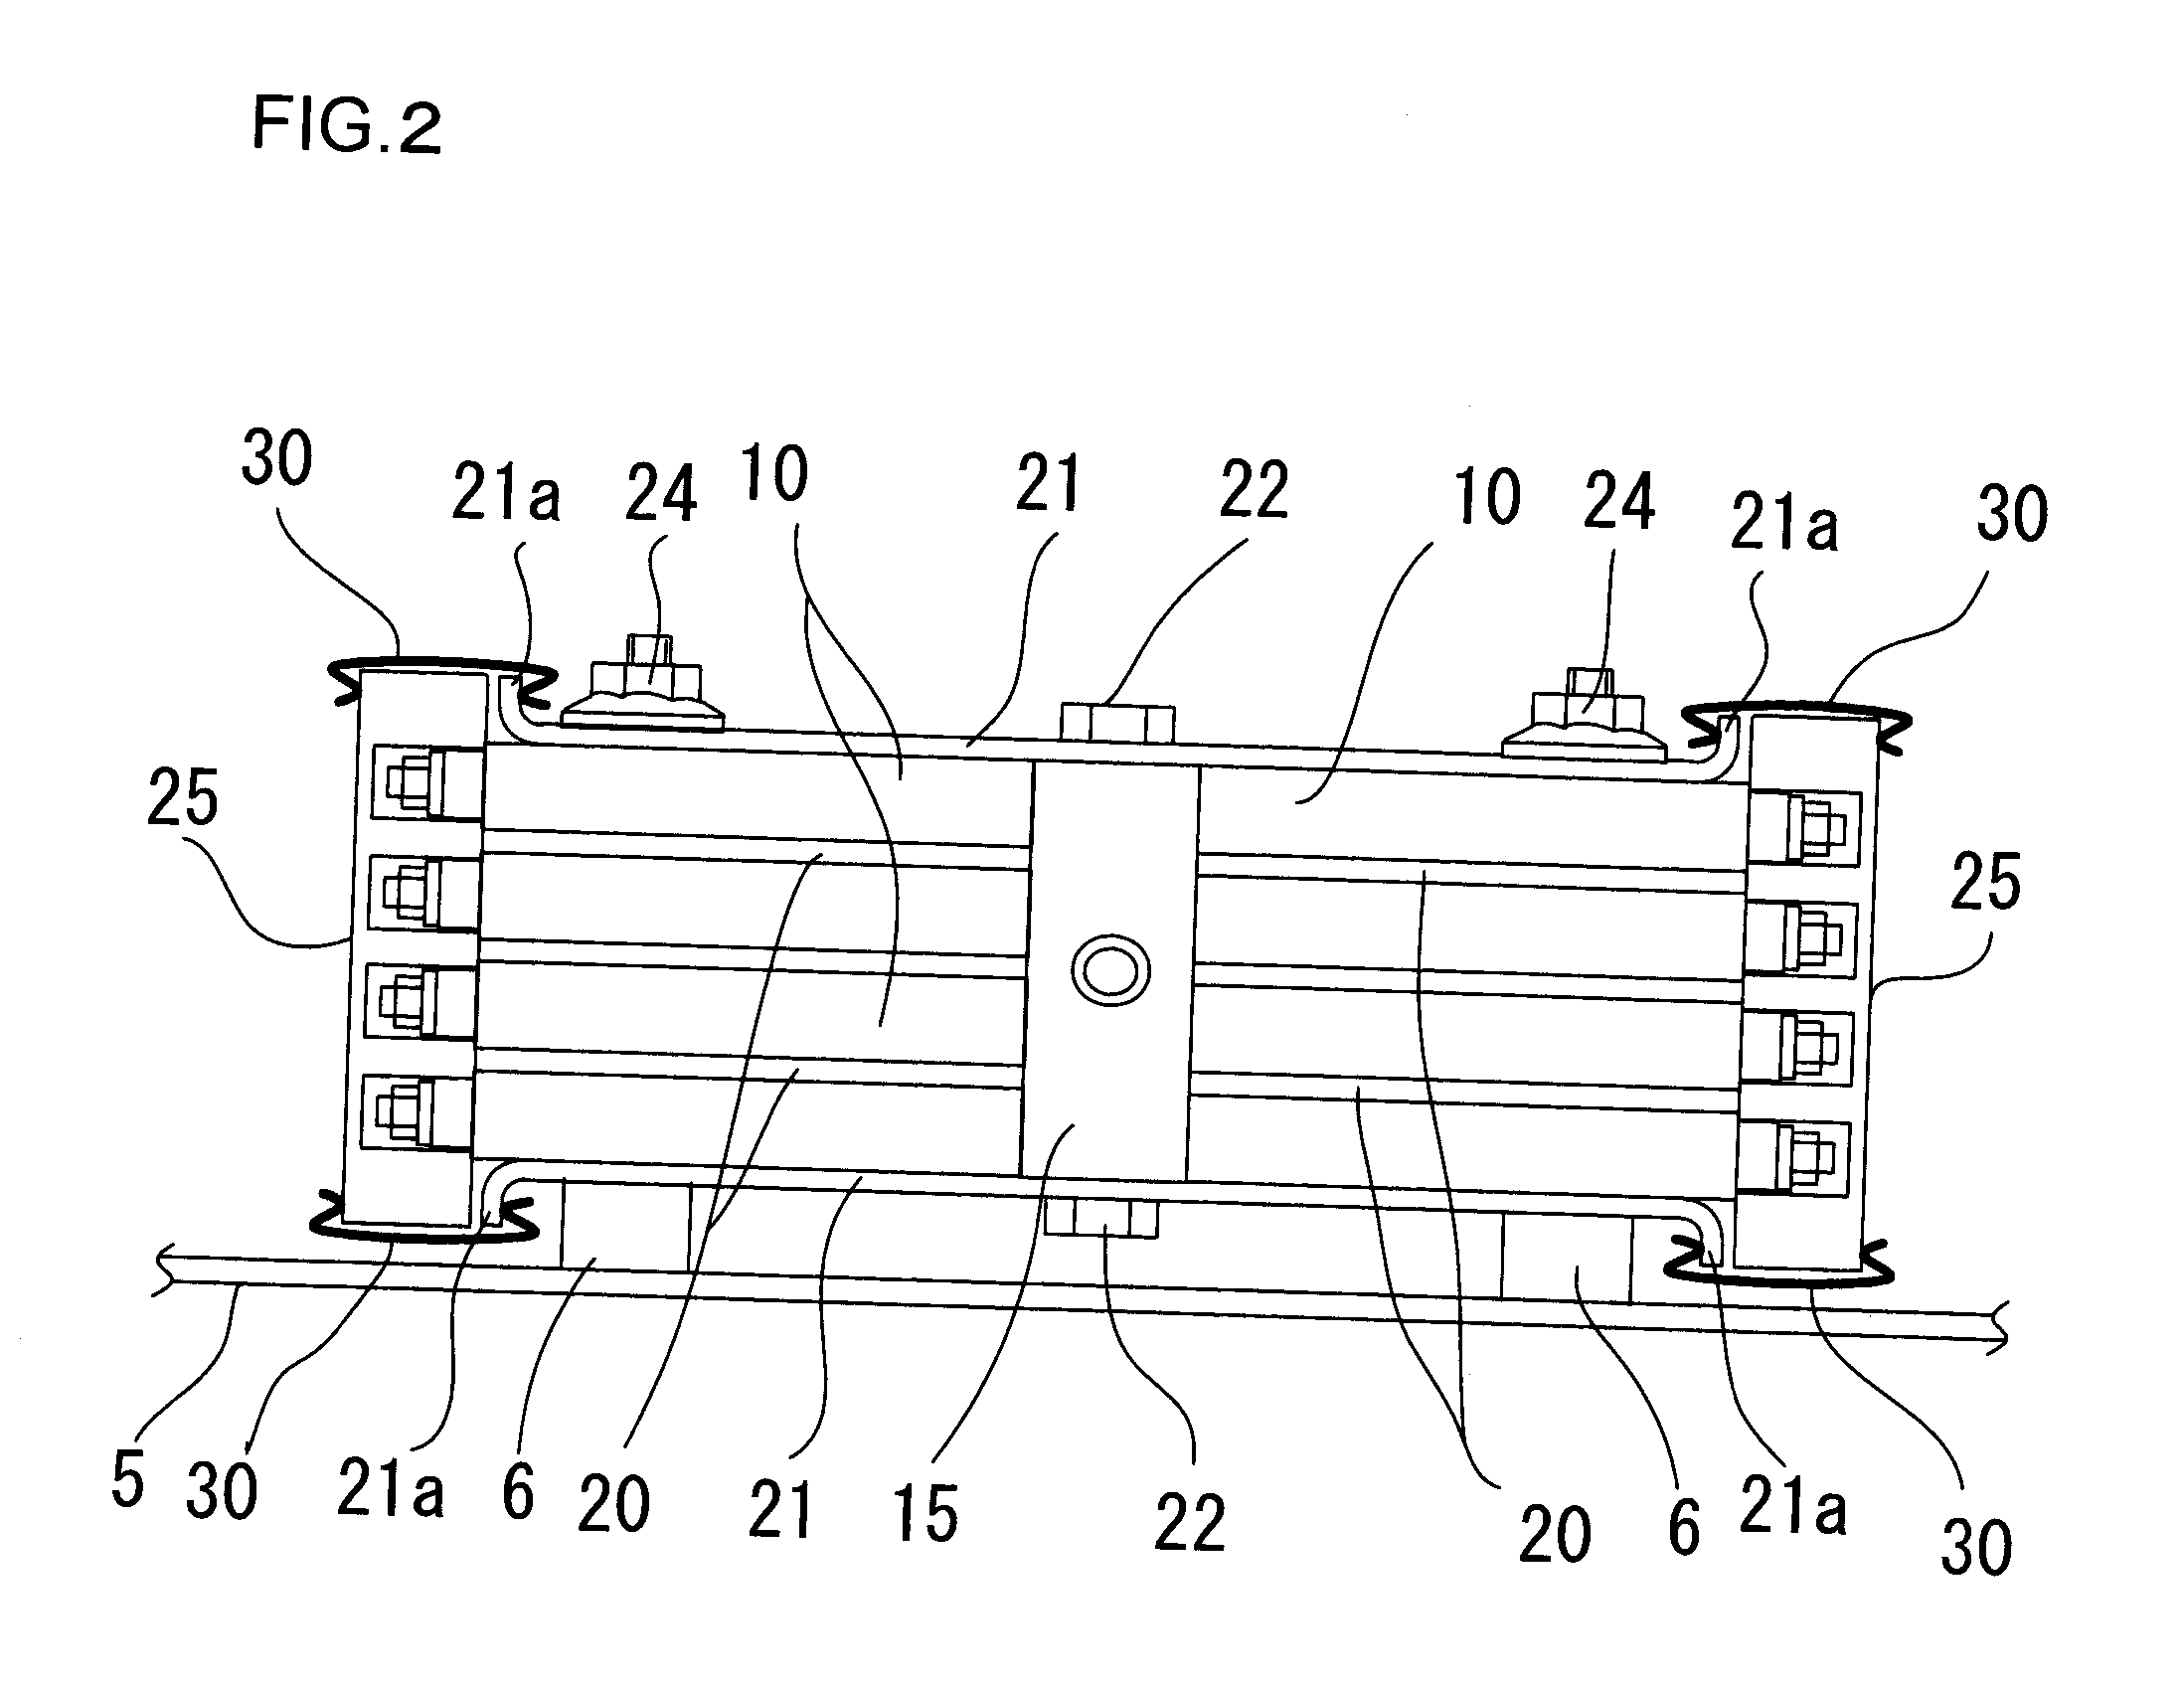 Electric Storage Module and Electric Storage Device